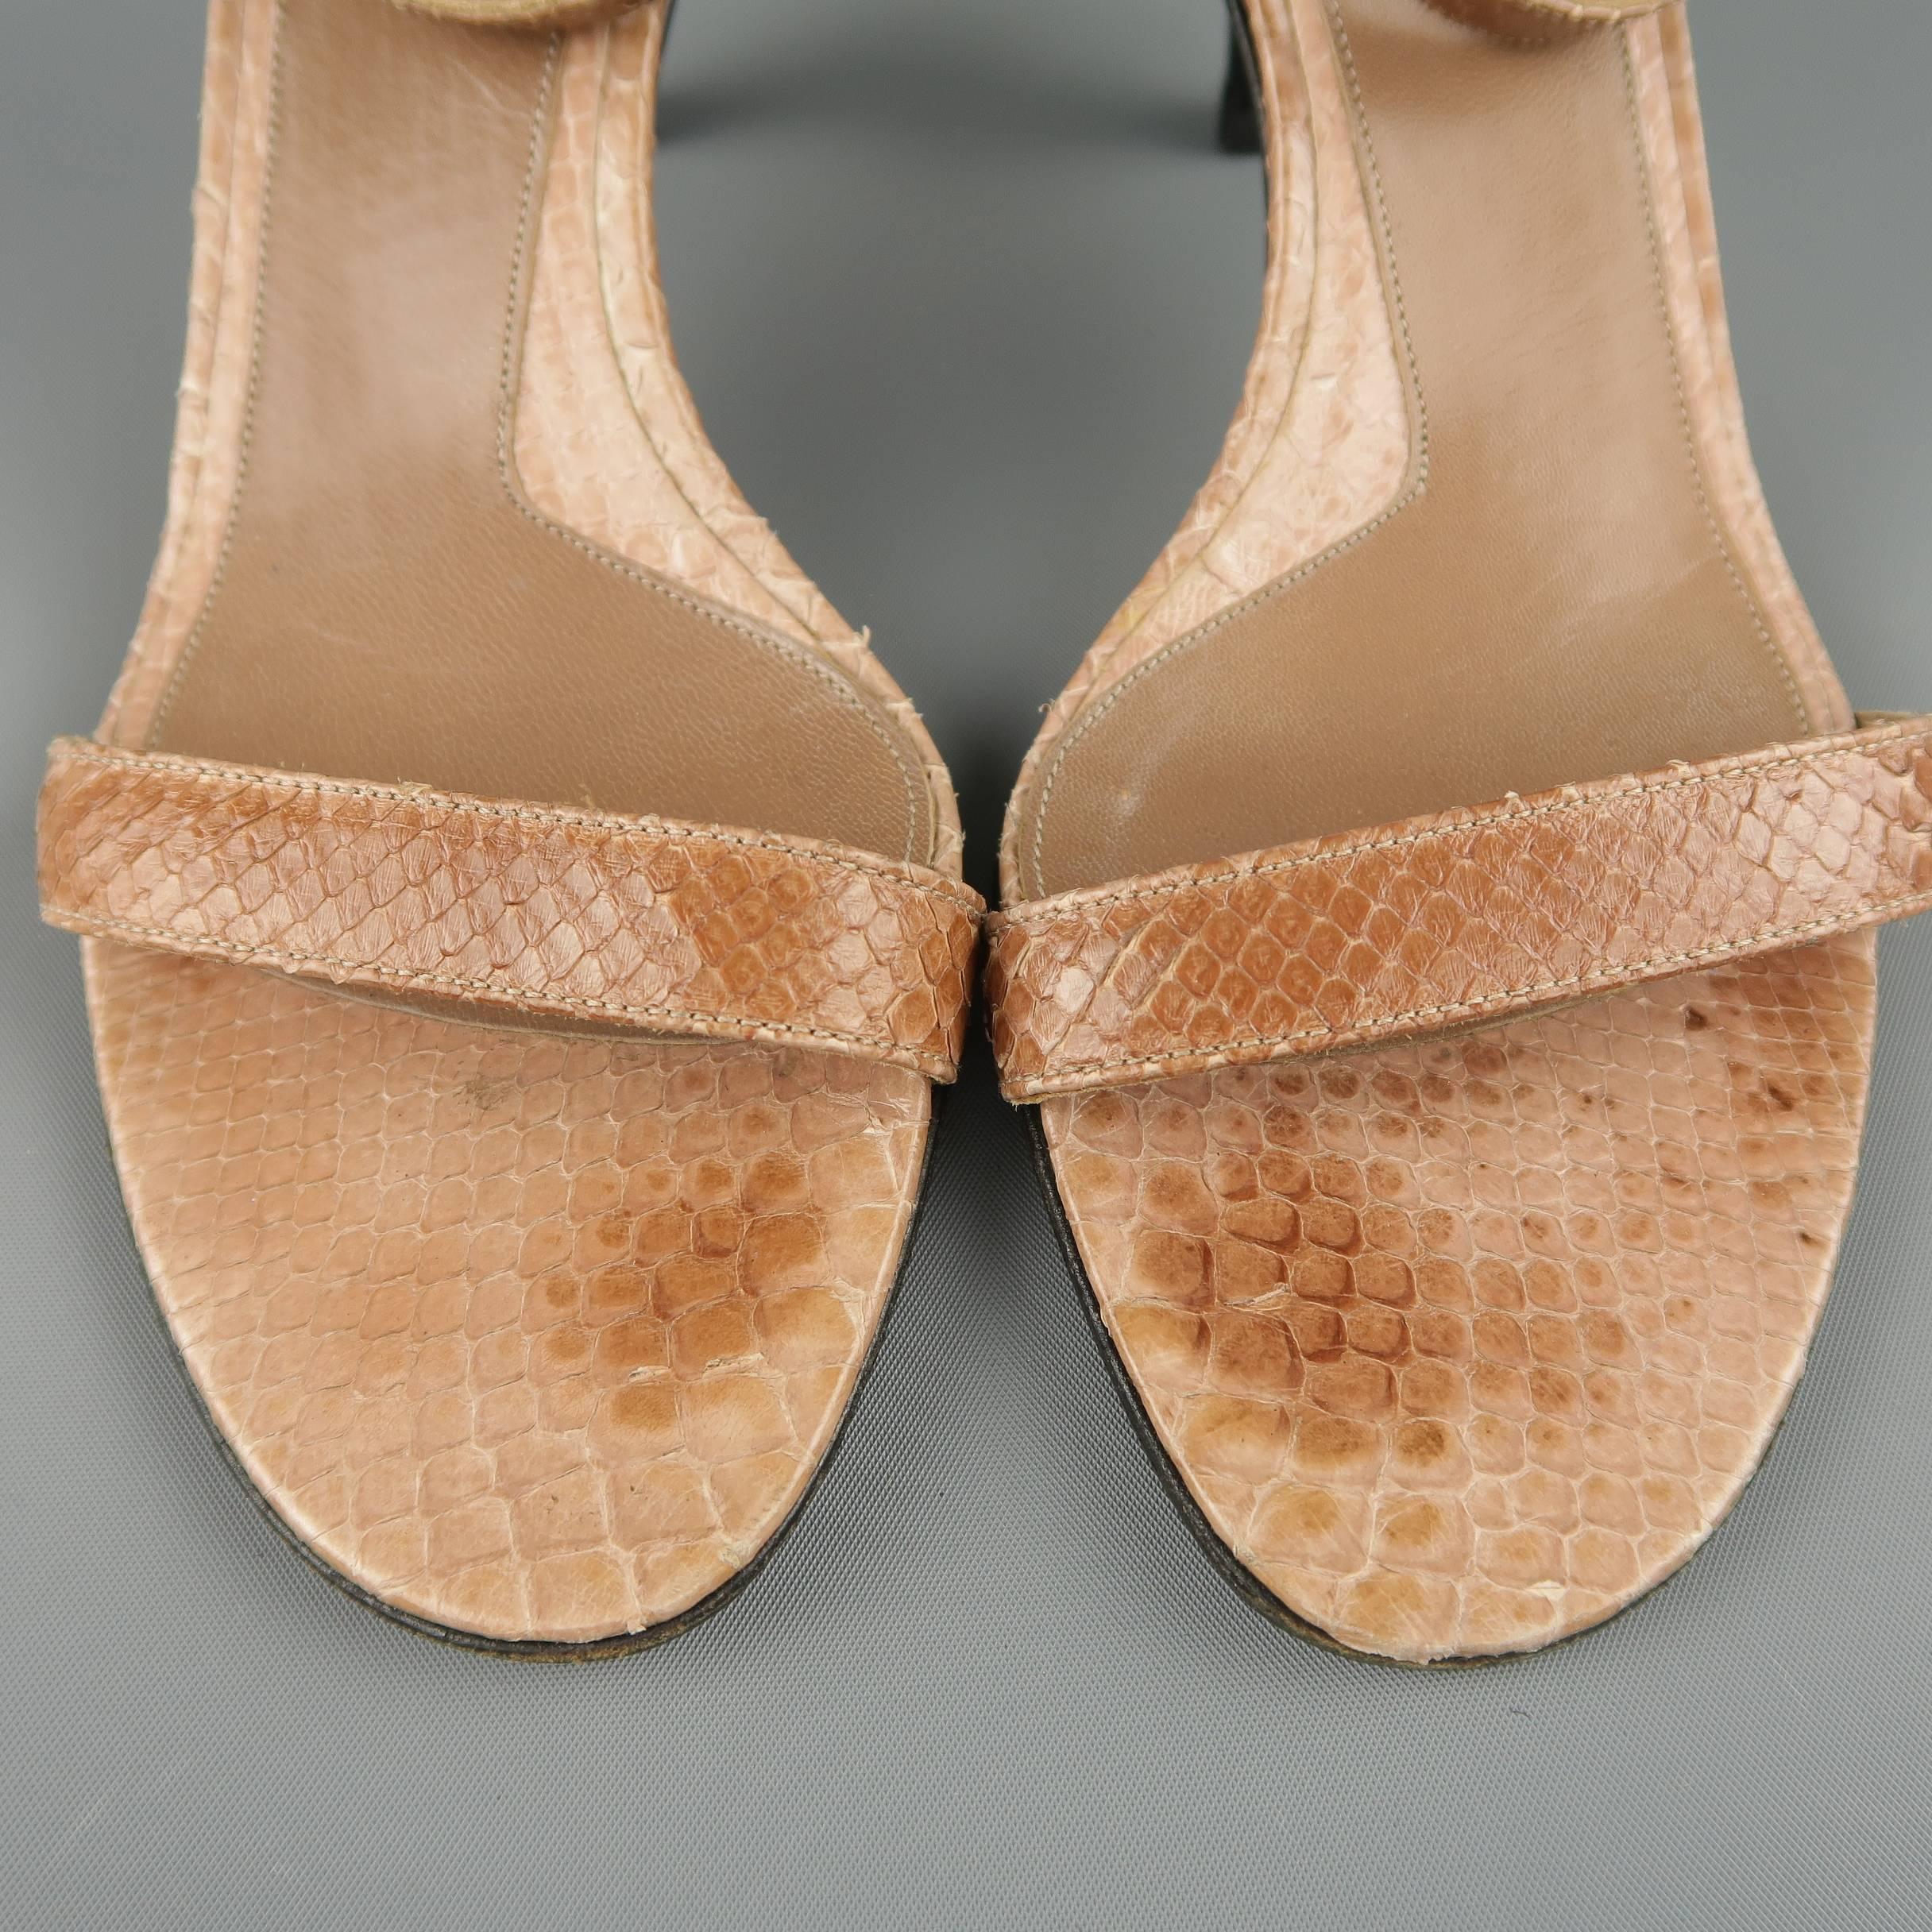 GUCCI sandals come in tan snake skin leather with a skinny toe strap and buckle ankle strap. Made in Italy.
 
Good Pre-Owned Condition.
Marked: IT 35.5 C
 
Measurements:
 
Heel: 2.5 in.
